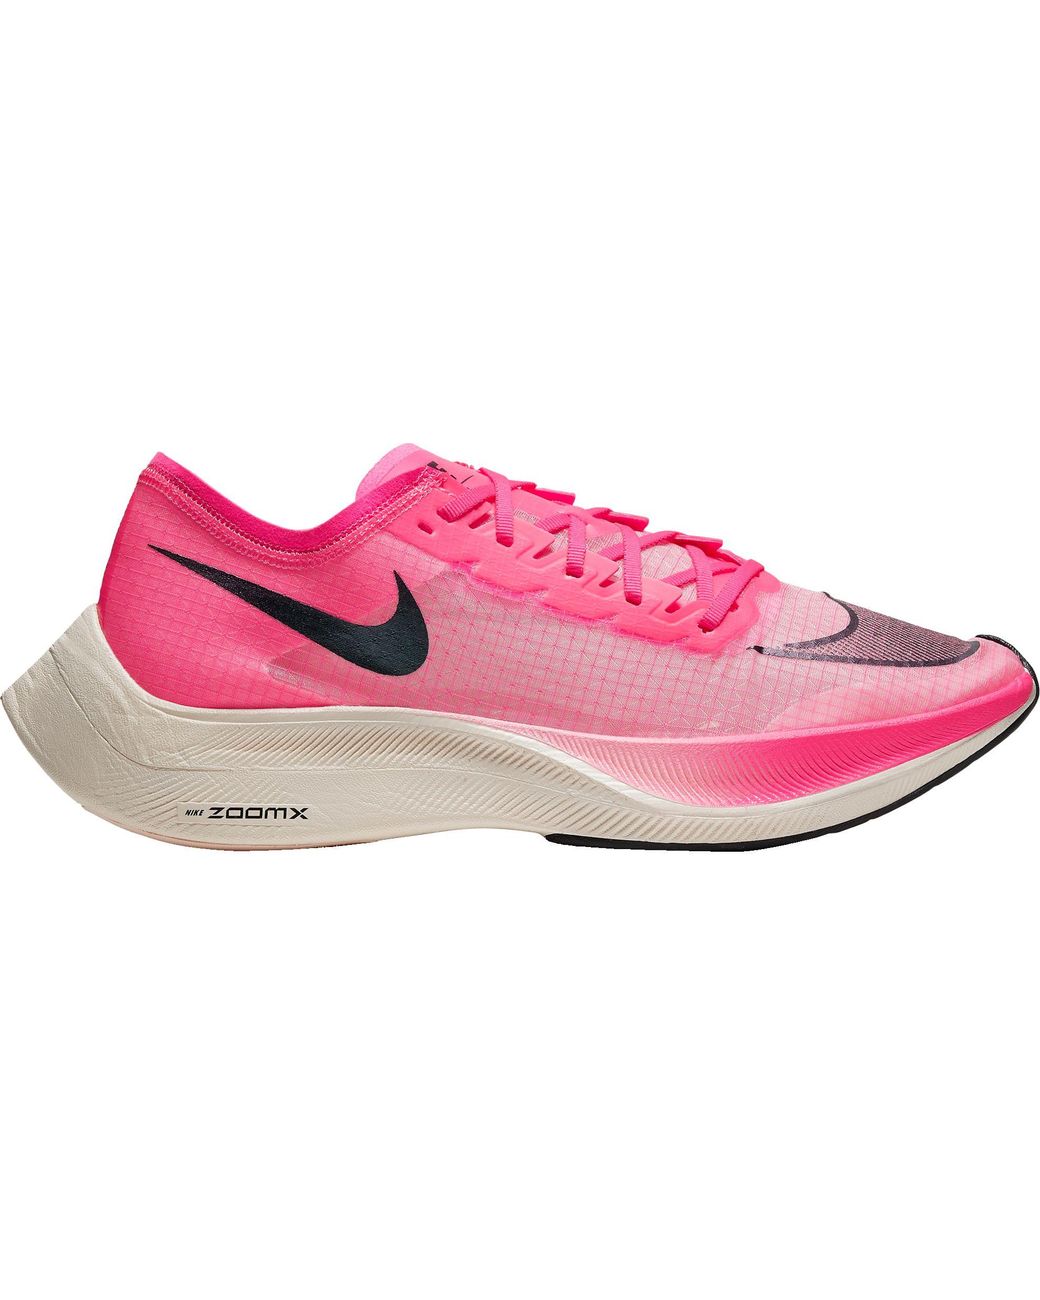 Nike Zoomx Vaporfly Next% Running Shoe in Black/Pink (Pink) for Men - Save  52% - Lyst